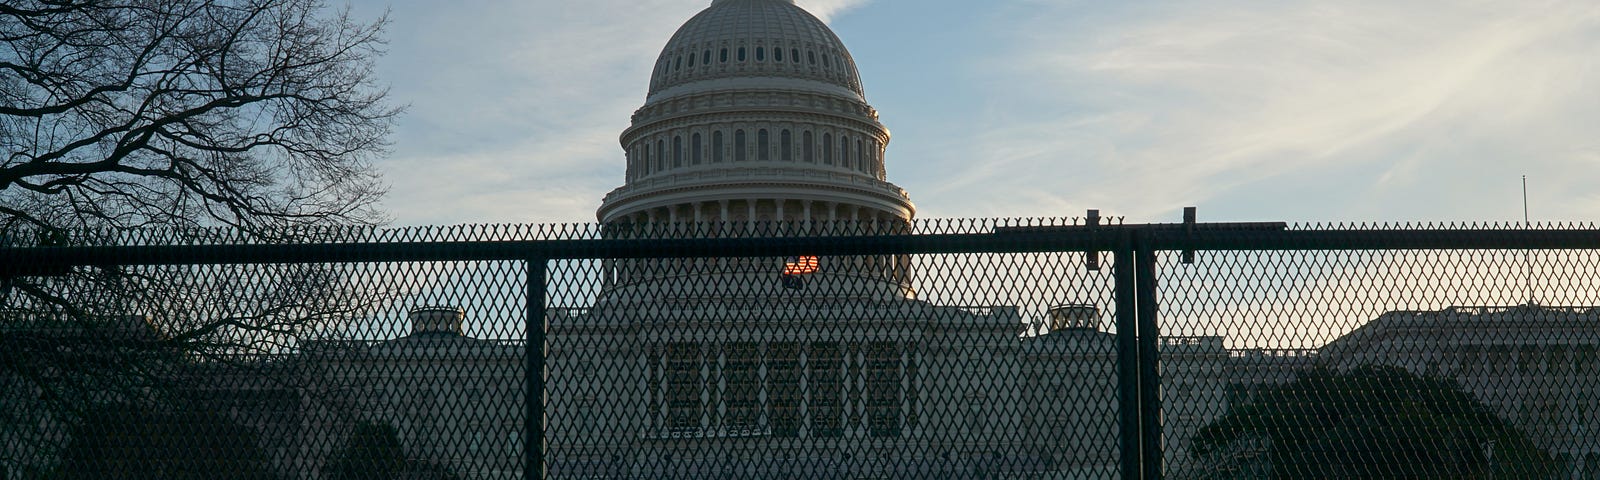 House of Representatives behind a fence wall